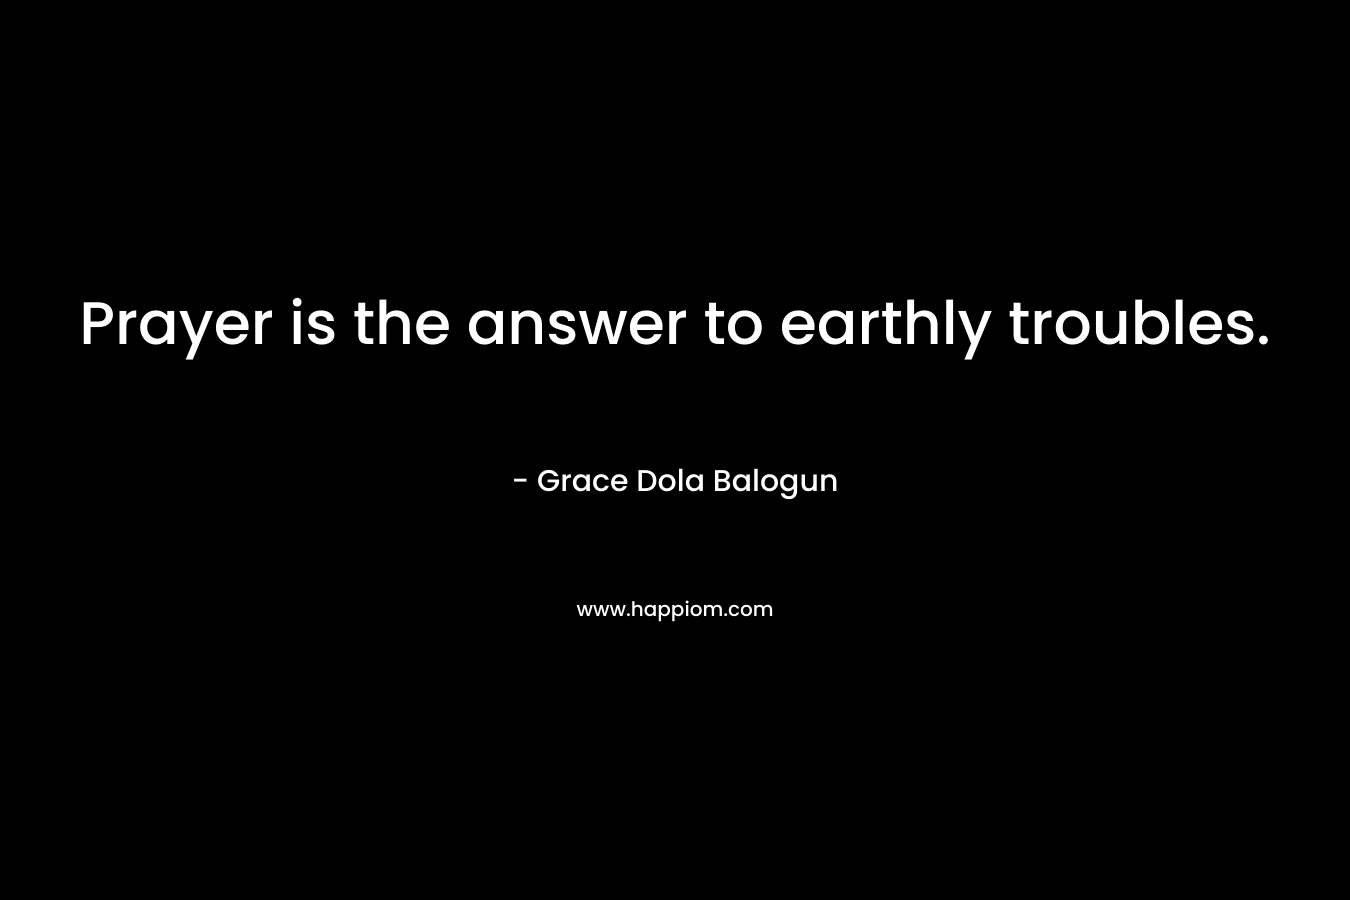 Prayer is the answer to earthly troubles. – Grace Dola Balogun